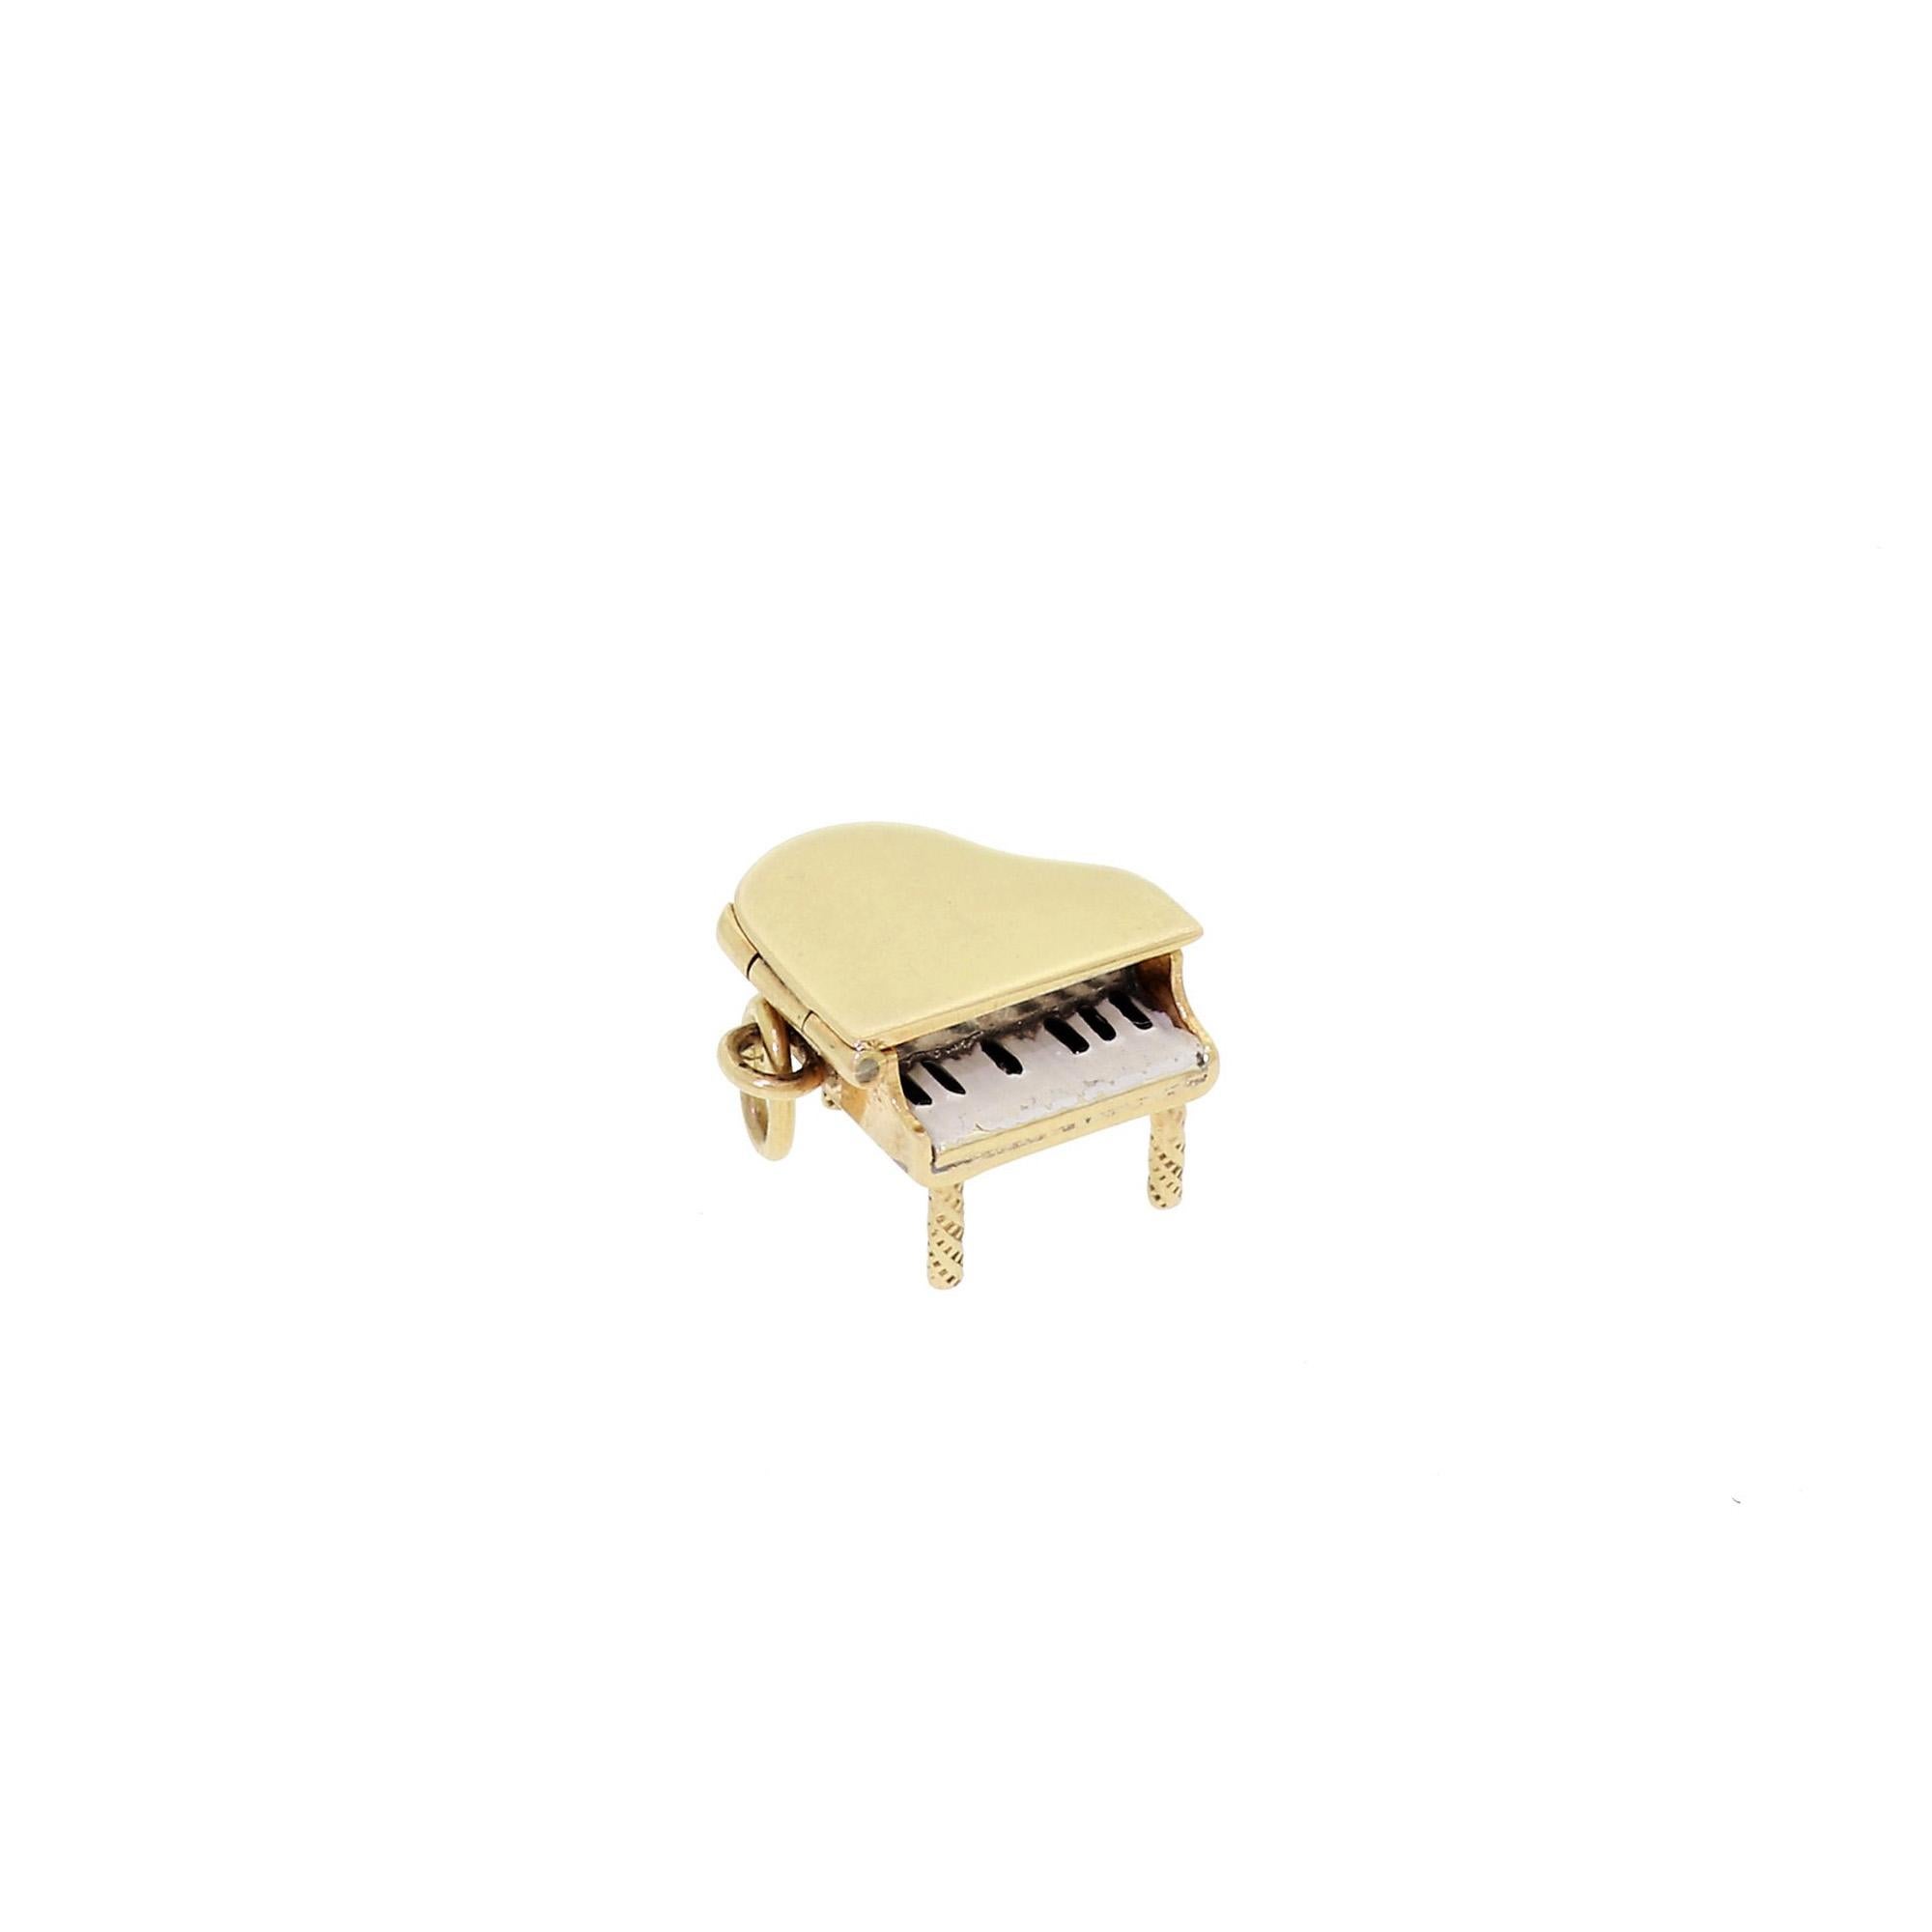 Vintage 14K yellow gold baby grand piano charm with a tiny little secret. This adorable charm features black and white enameled piano keys with an articulated lid that hinges open to reveal a secret space. The charm is exceptionally detailed and